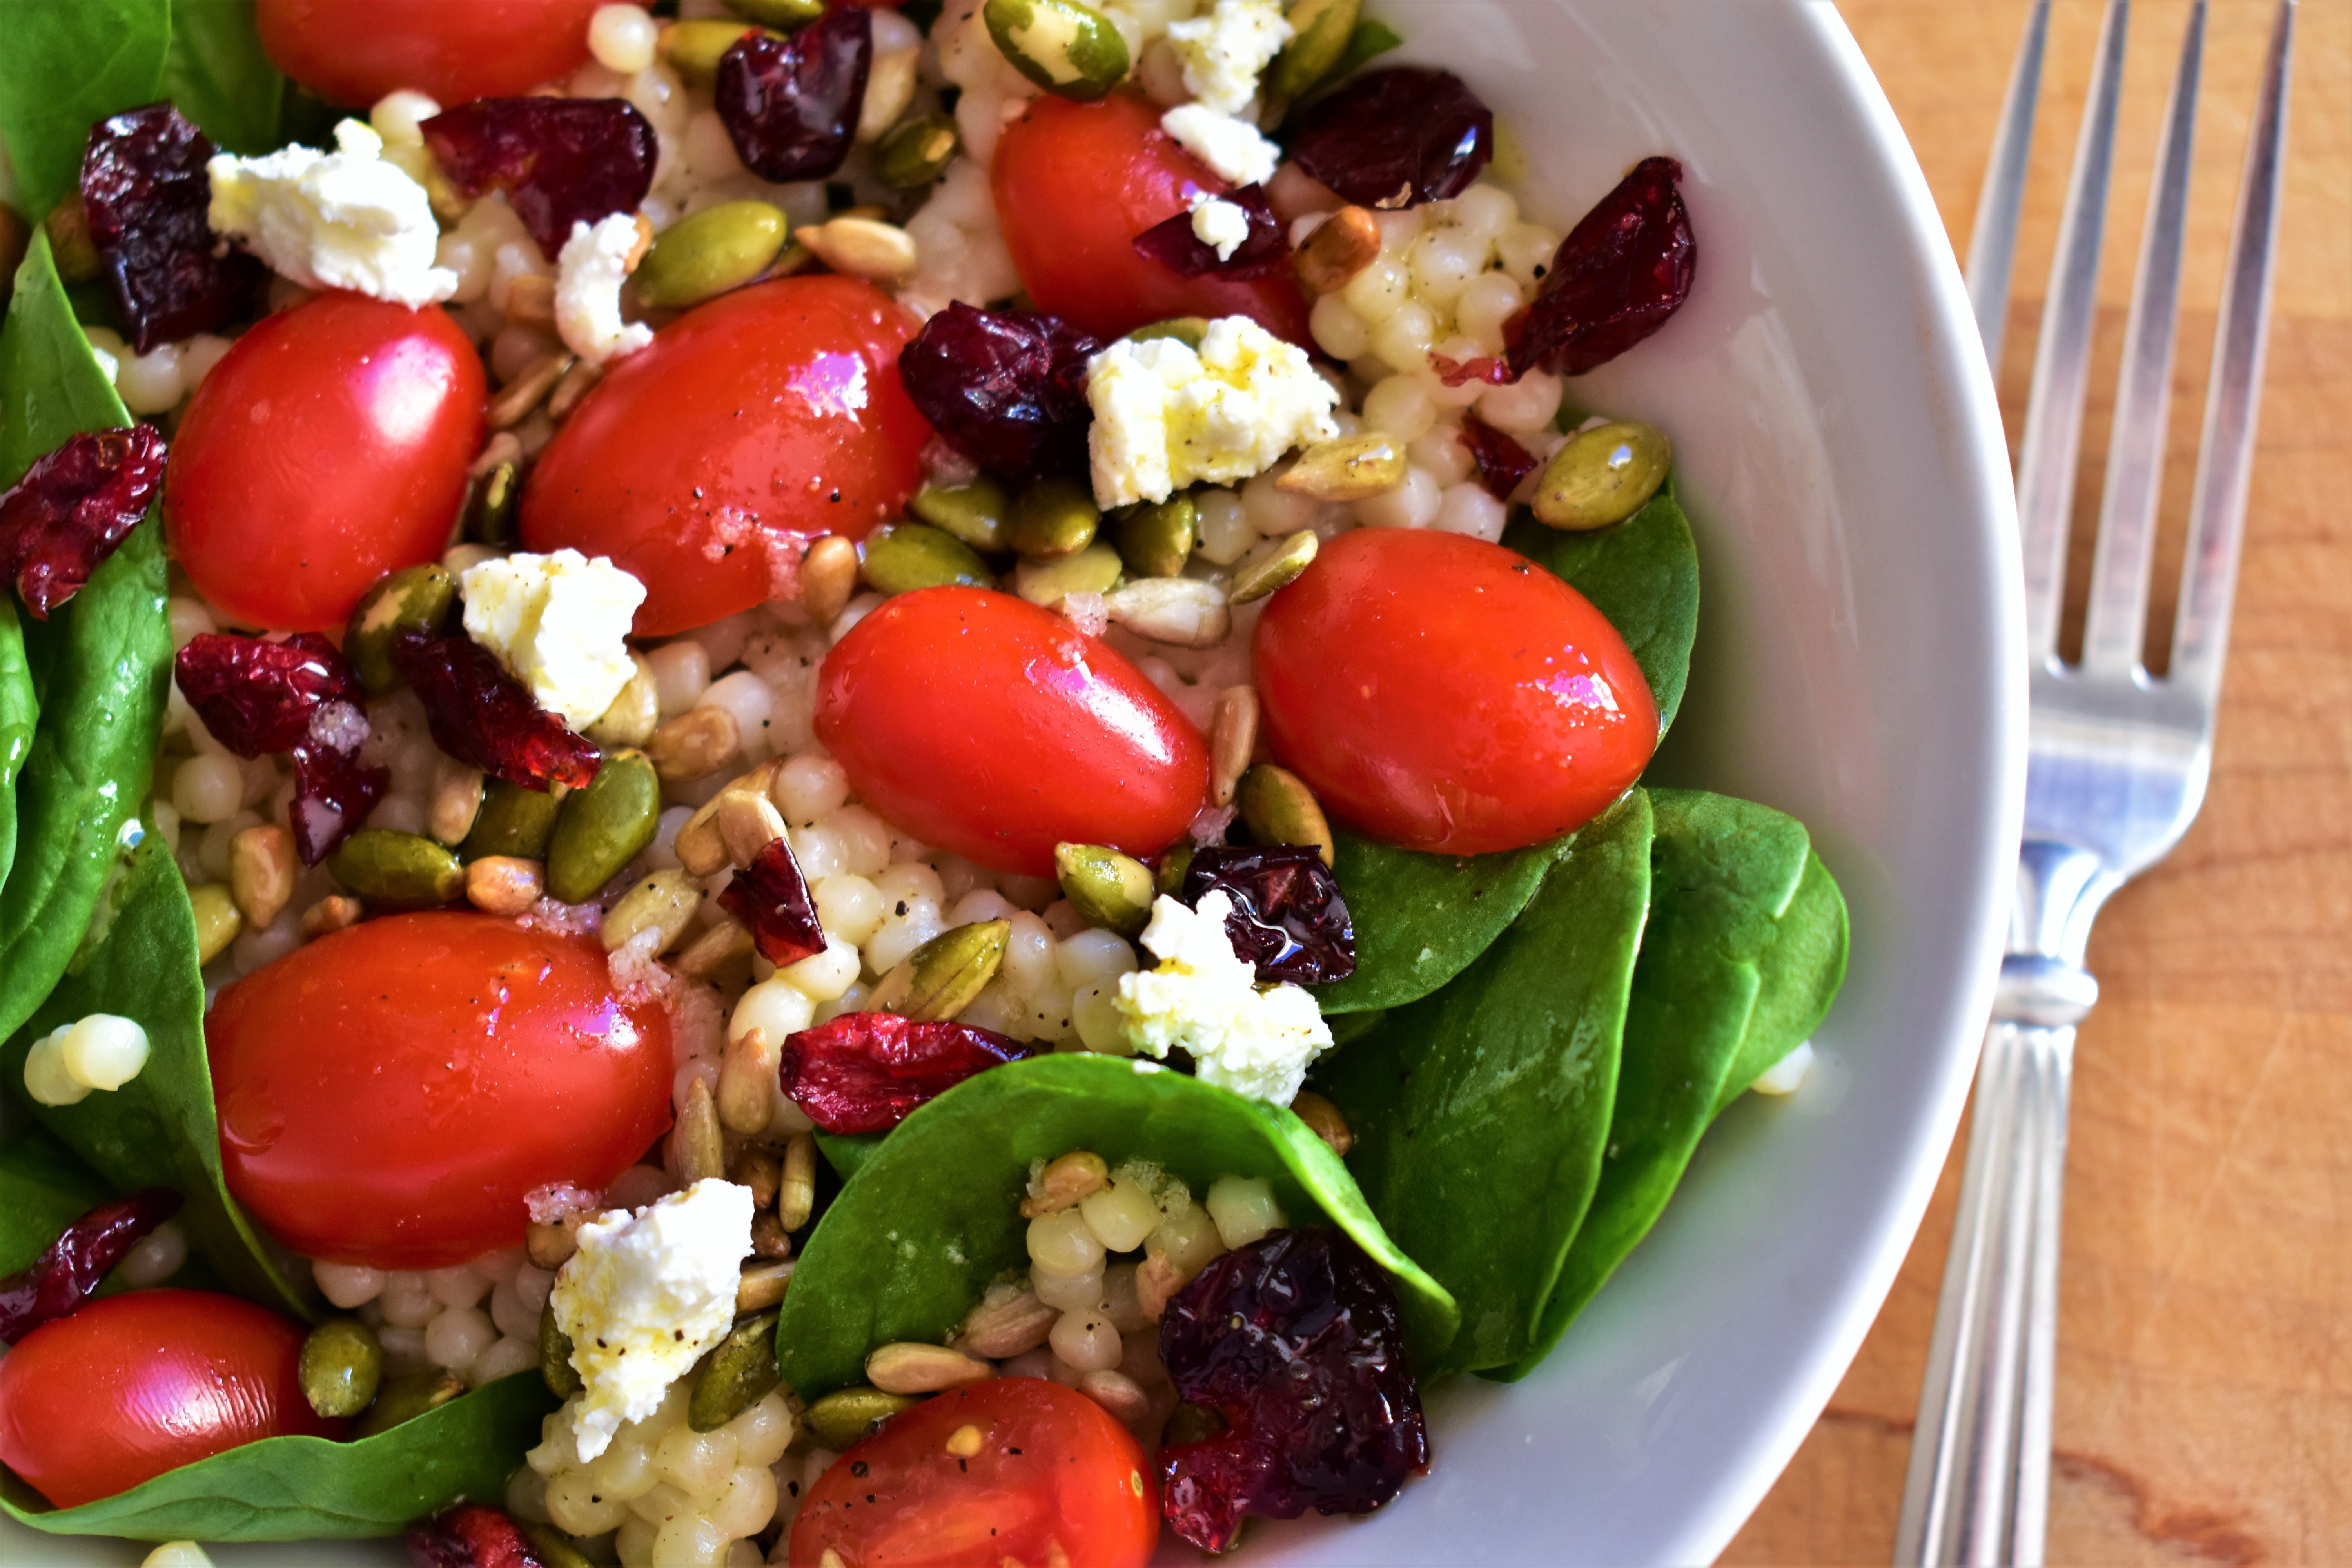 Couscous Salad with Kale, Tomatoes, Cranberries, and Feta